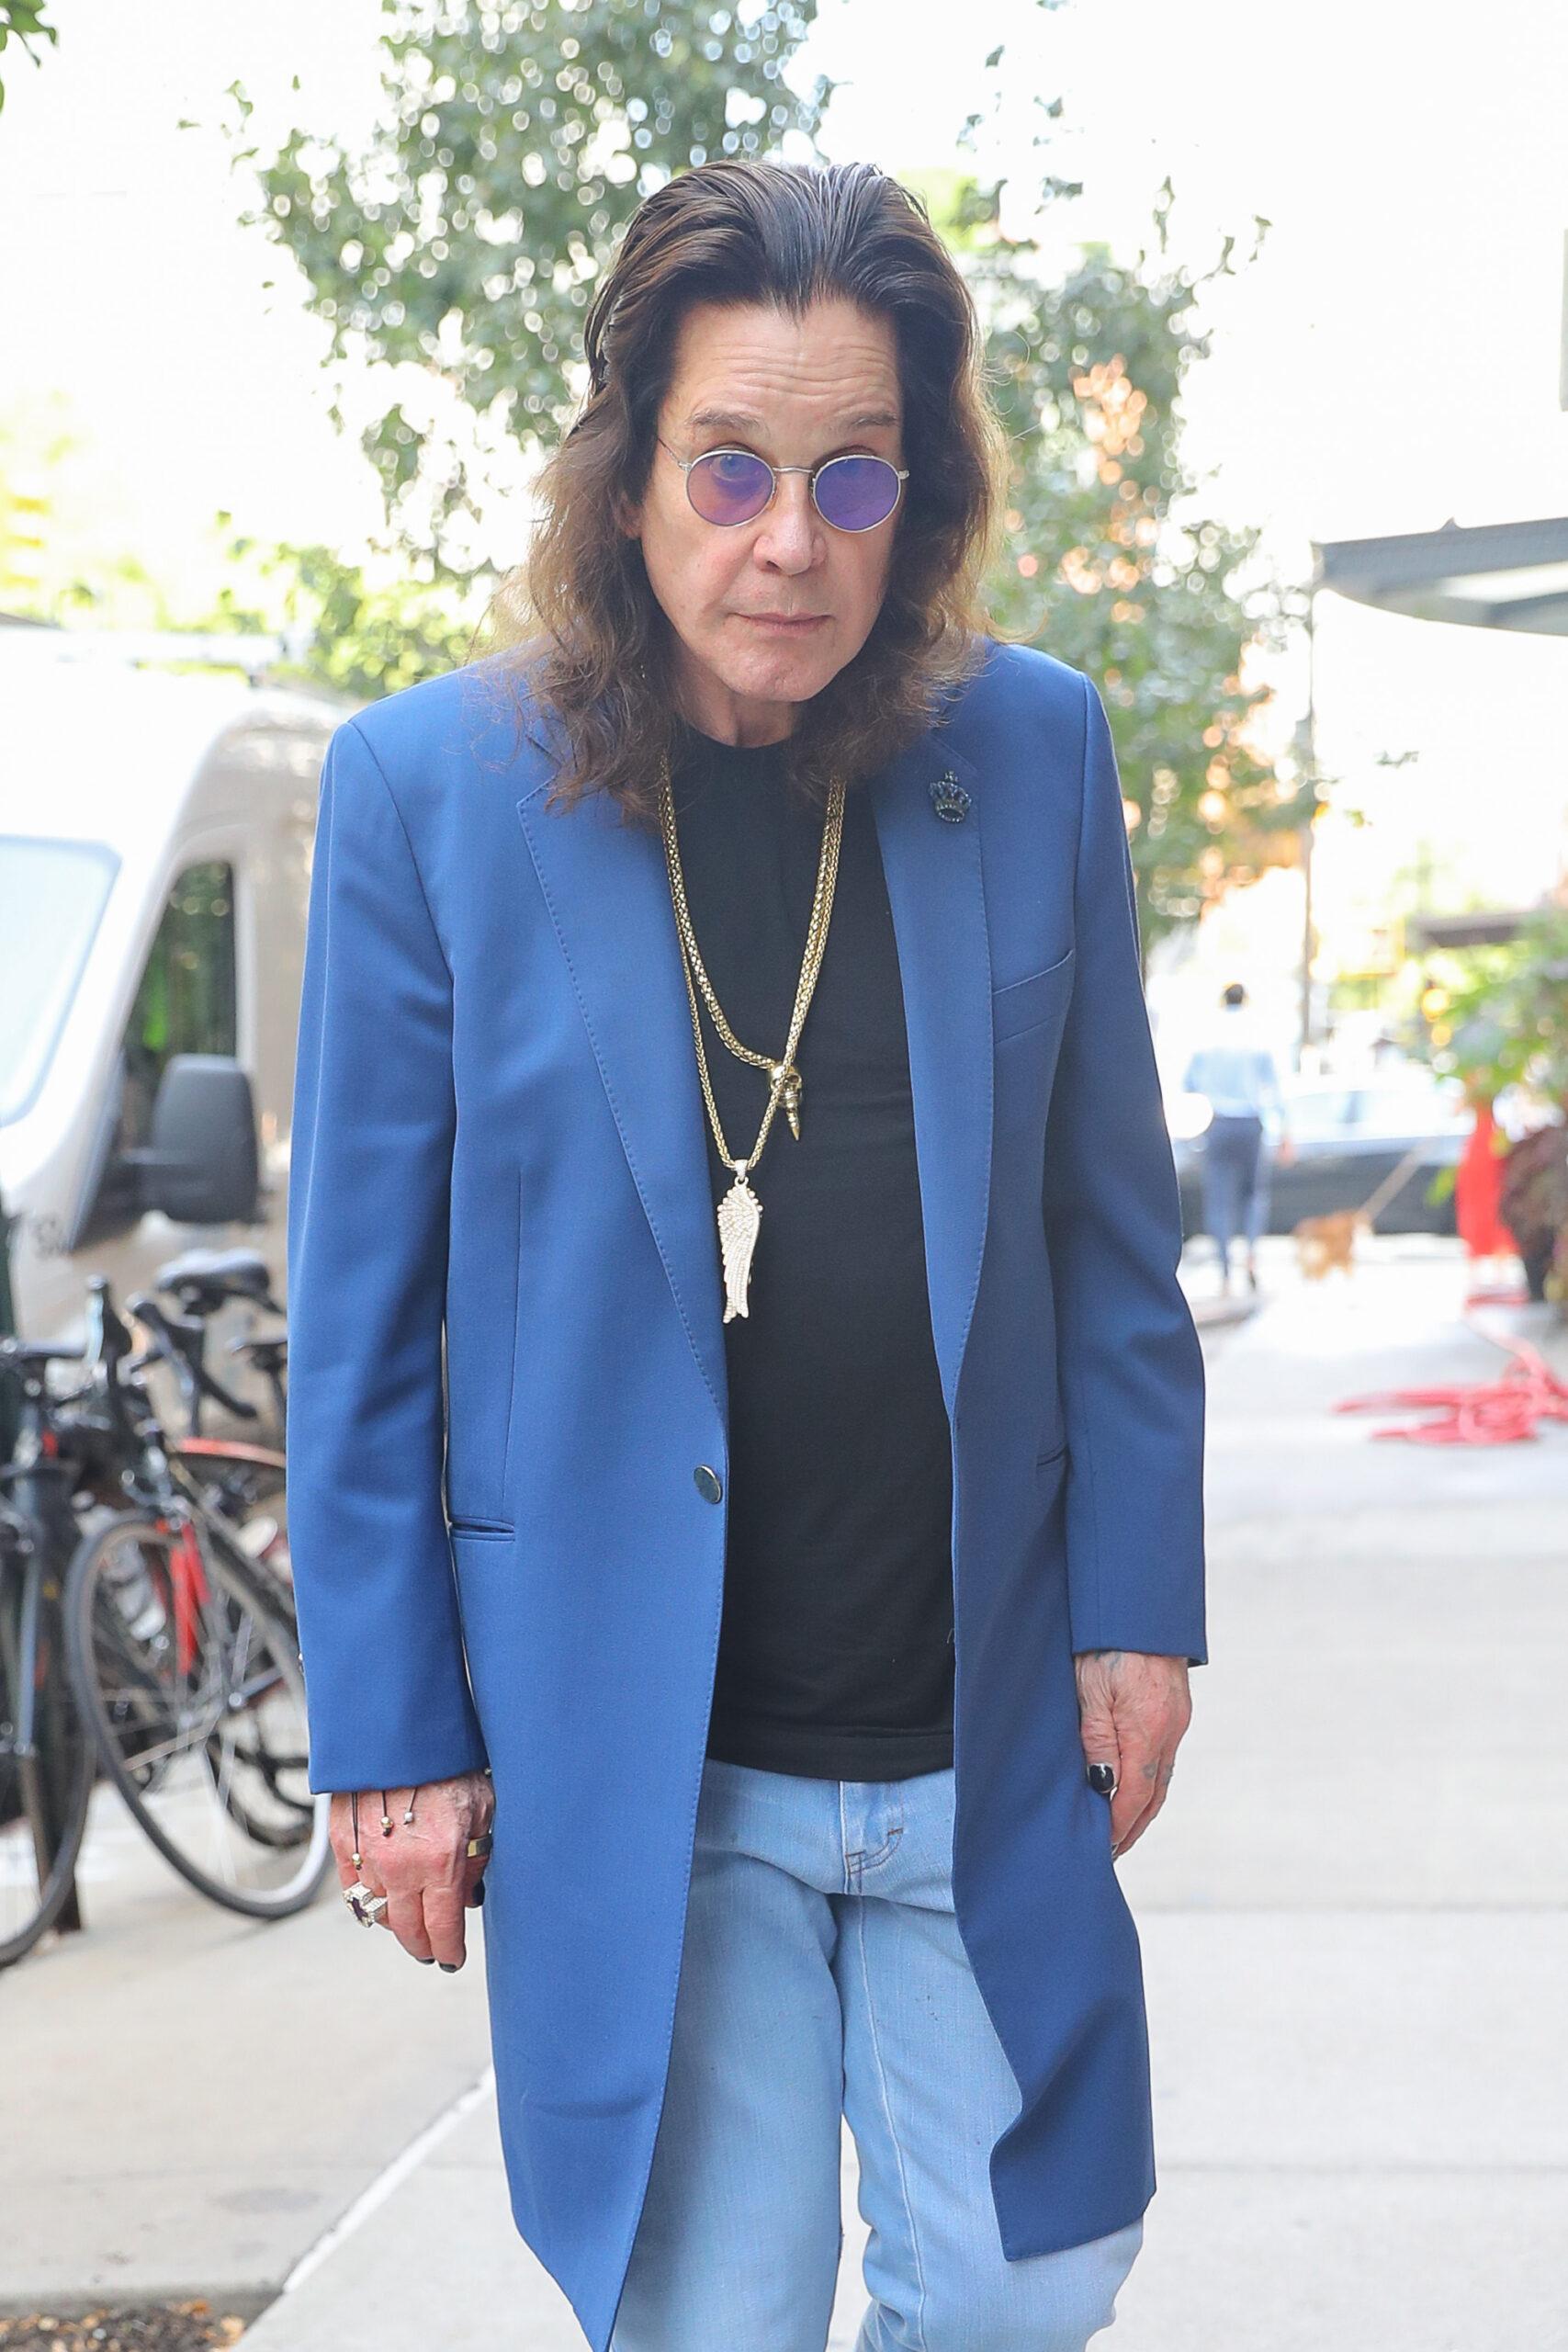 Ozzy Osbourne looks stylish while arrives at his hotel in New York City